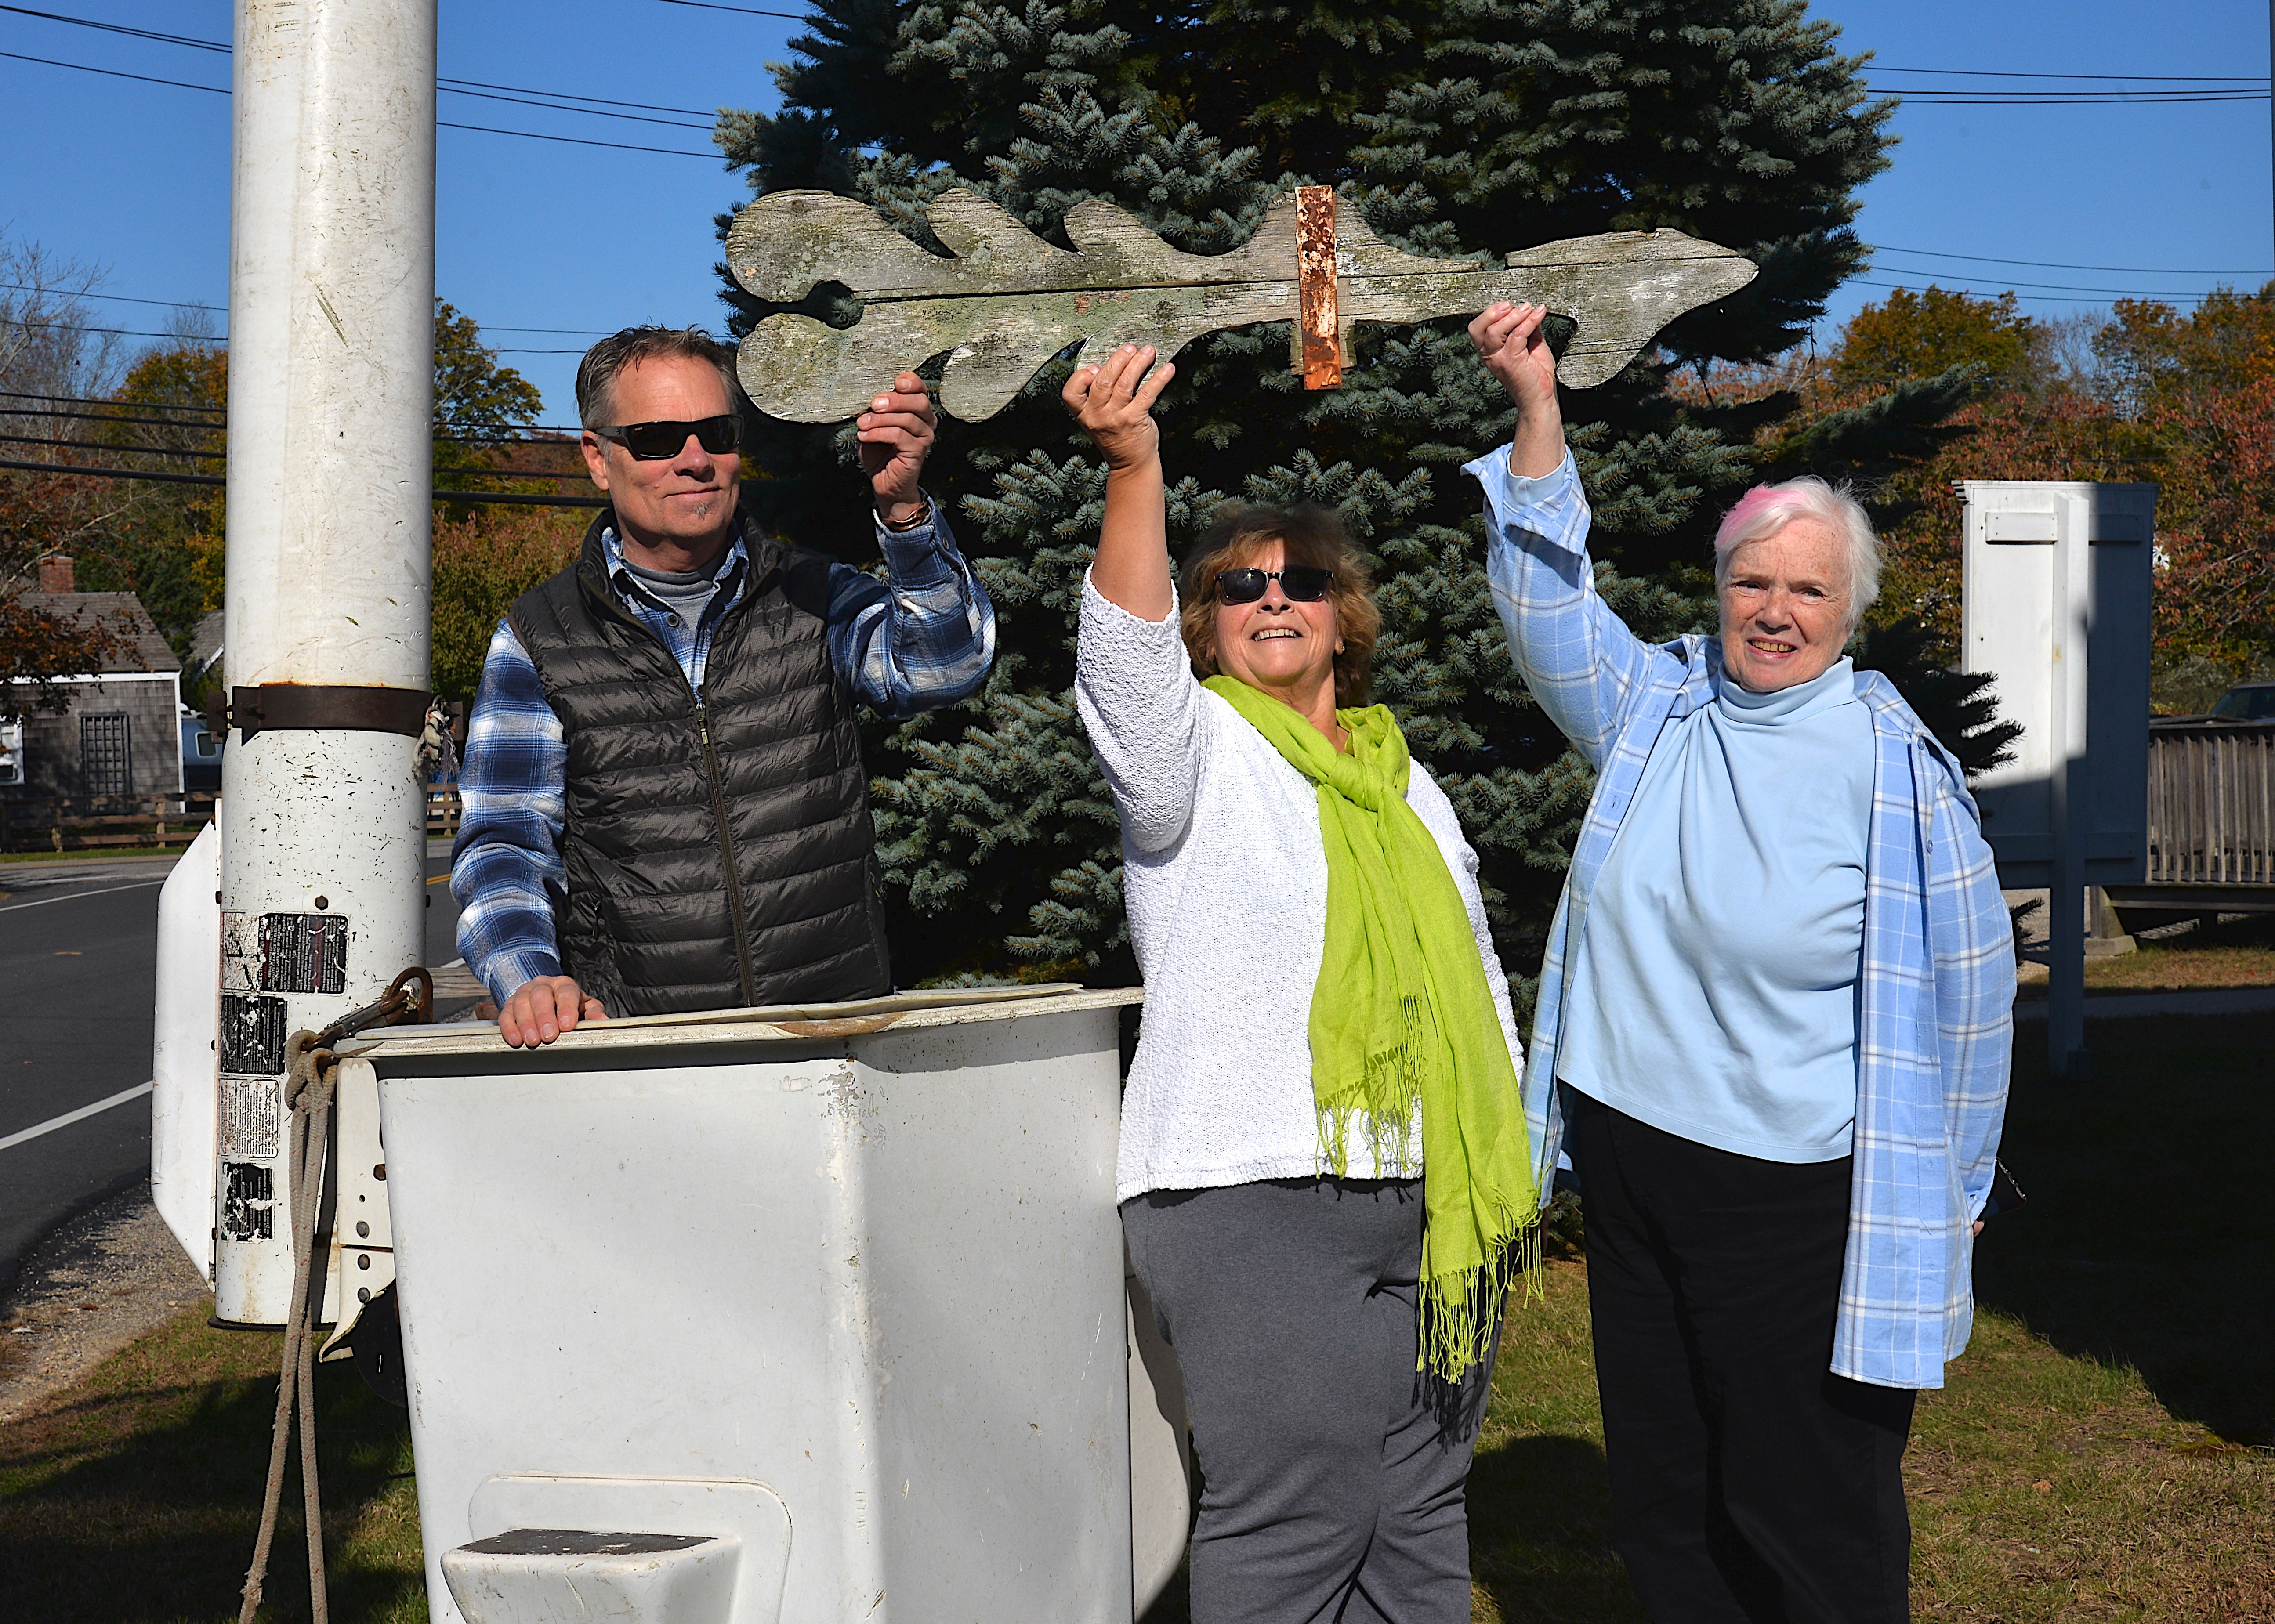 With assistance from Don Chambers of Timberworks who brought his cherry-picker, Ricky Muller removed the 137-year-old wooden windvane from the steeple of Springs Community Presbyterian Church on Sunday morning. A new windvane will be installed. KYRIL BROMLEY 